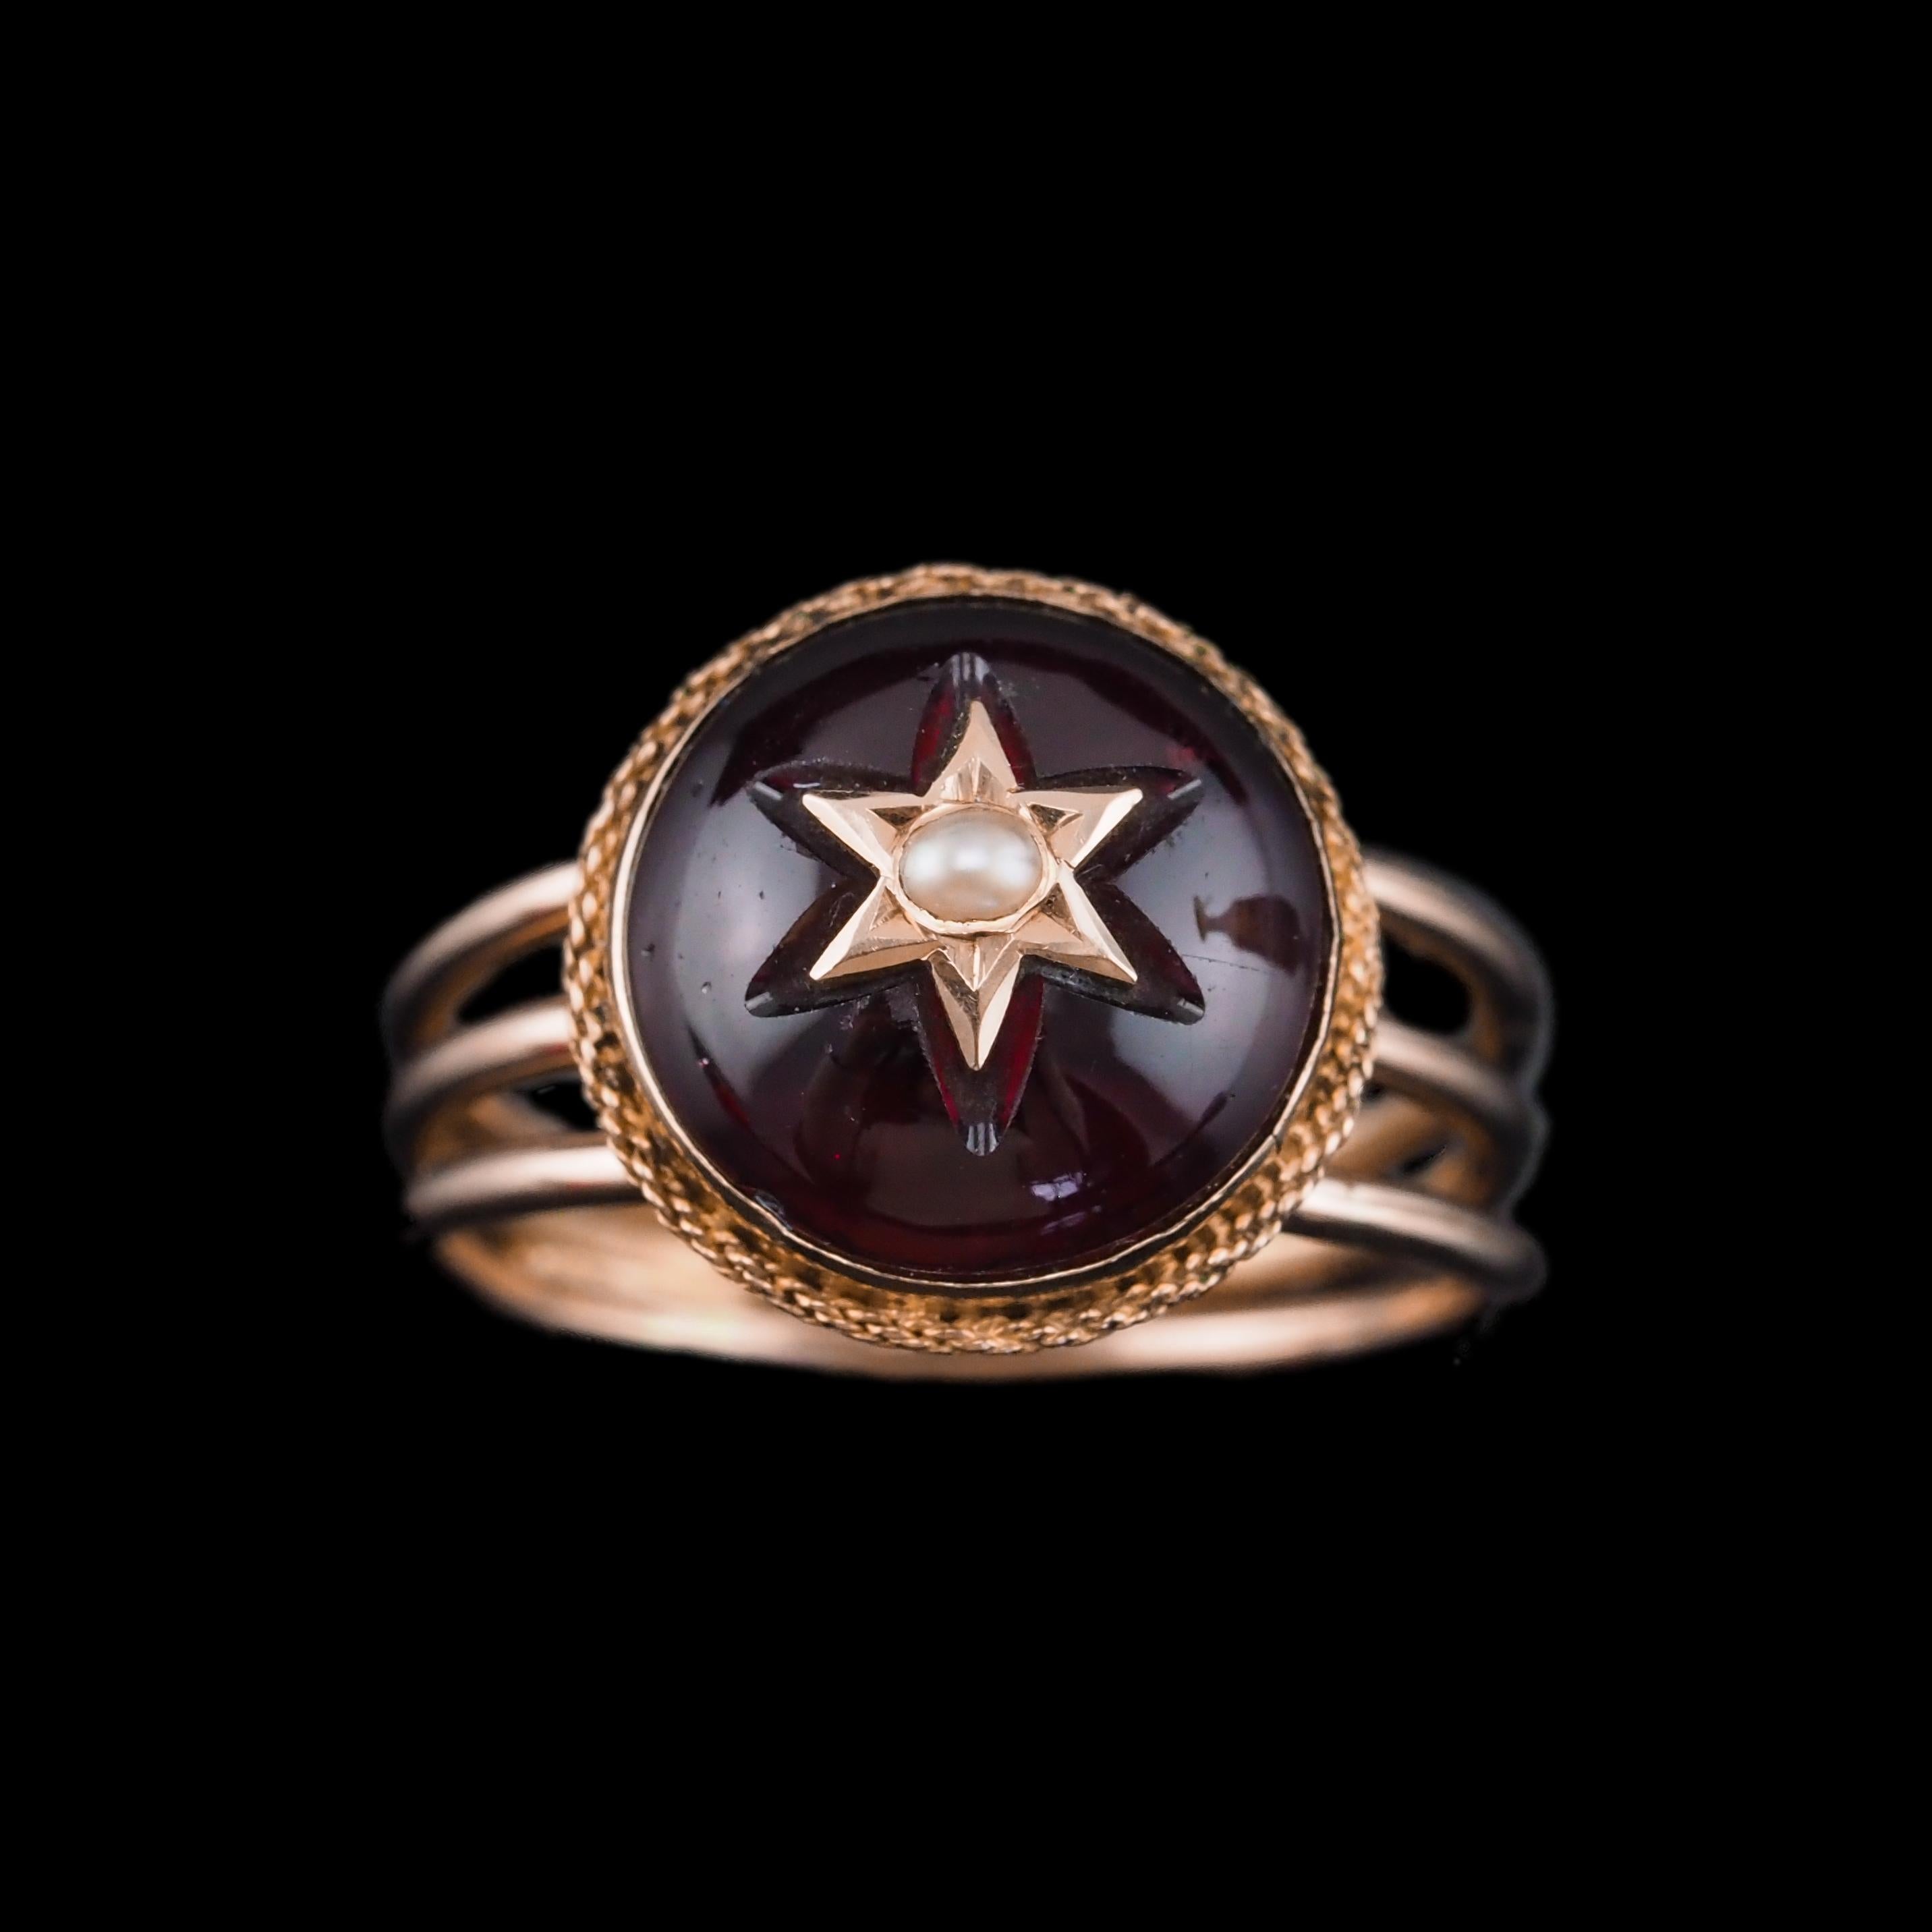 Antique Victorian 14K Gold Garnet Star Cabochon Ring with Seed Pearl - c.1880 For Sale 1